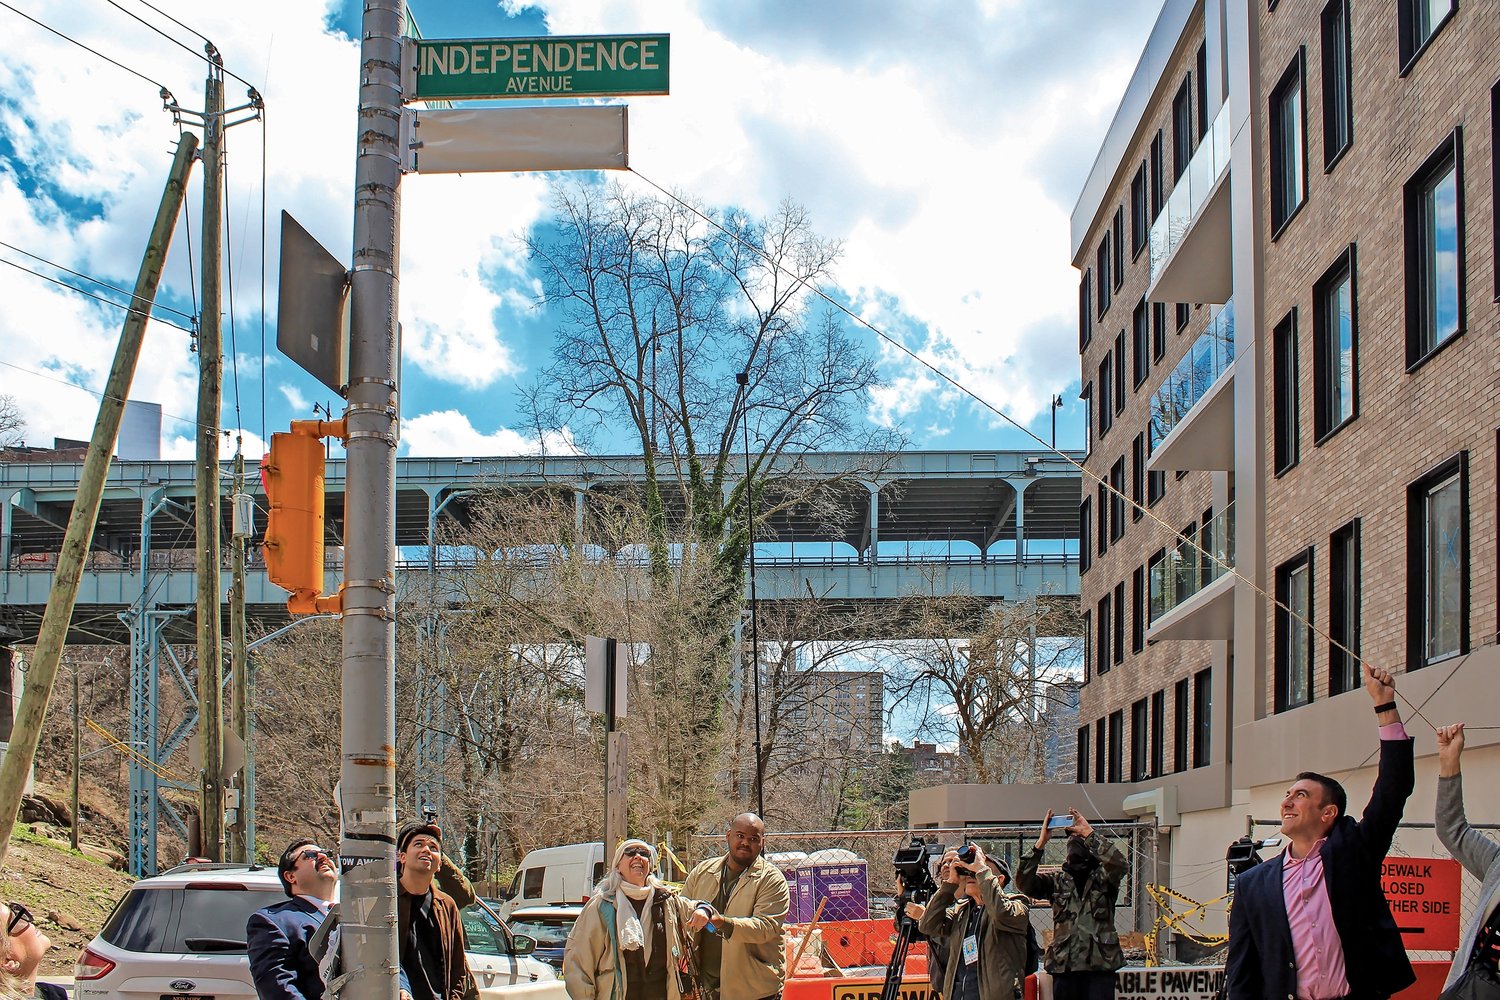 City councilman Eric Dinowitz and a host of guest speakers unveiled the historic co-street in Spuyten Duyvil April 8 to honor the late John J. McKelvey Sr. and his former building Villa Rosa Bonheur. It is at the intersection of Palisade and Independence avenues.